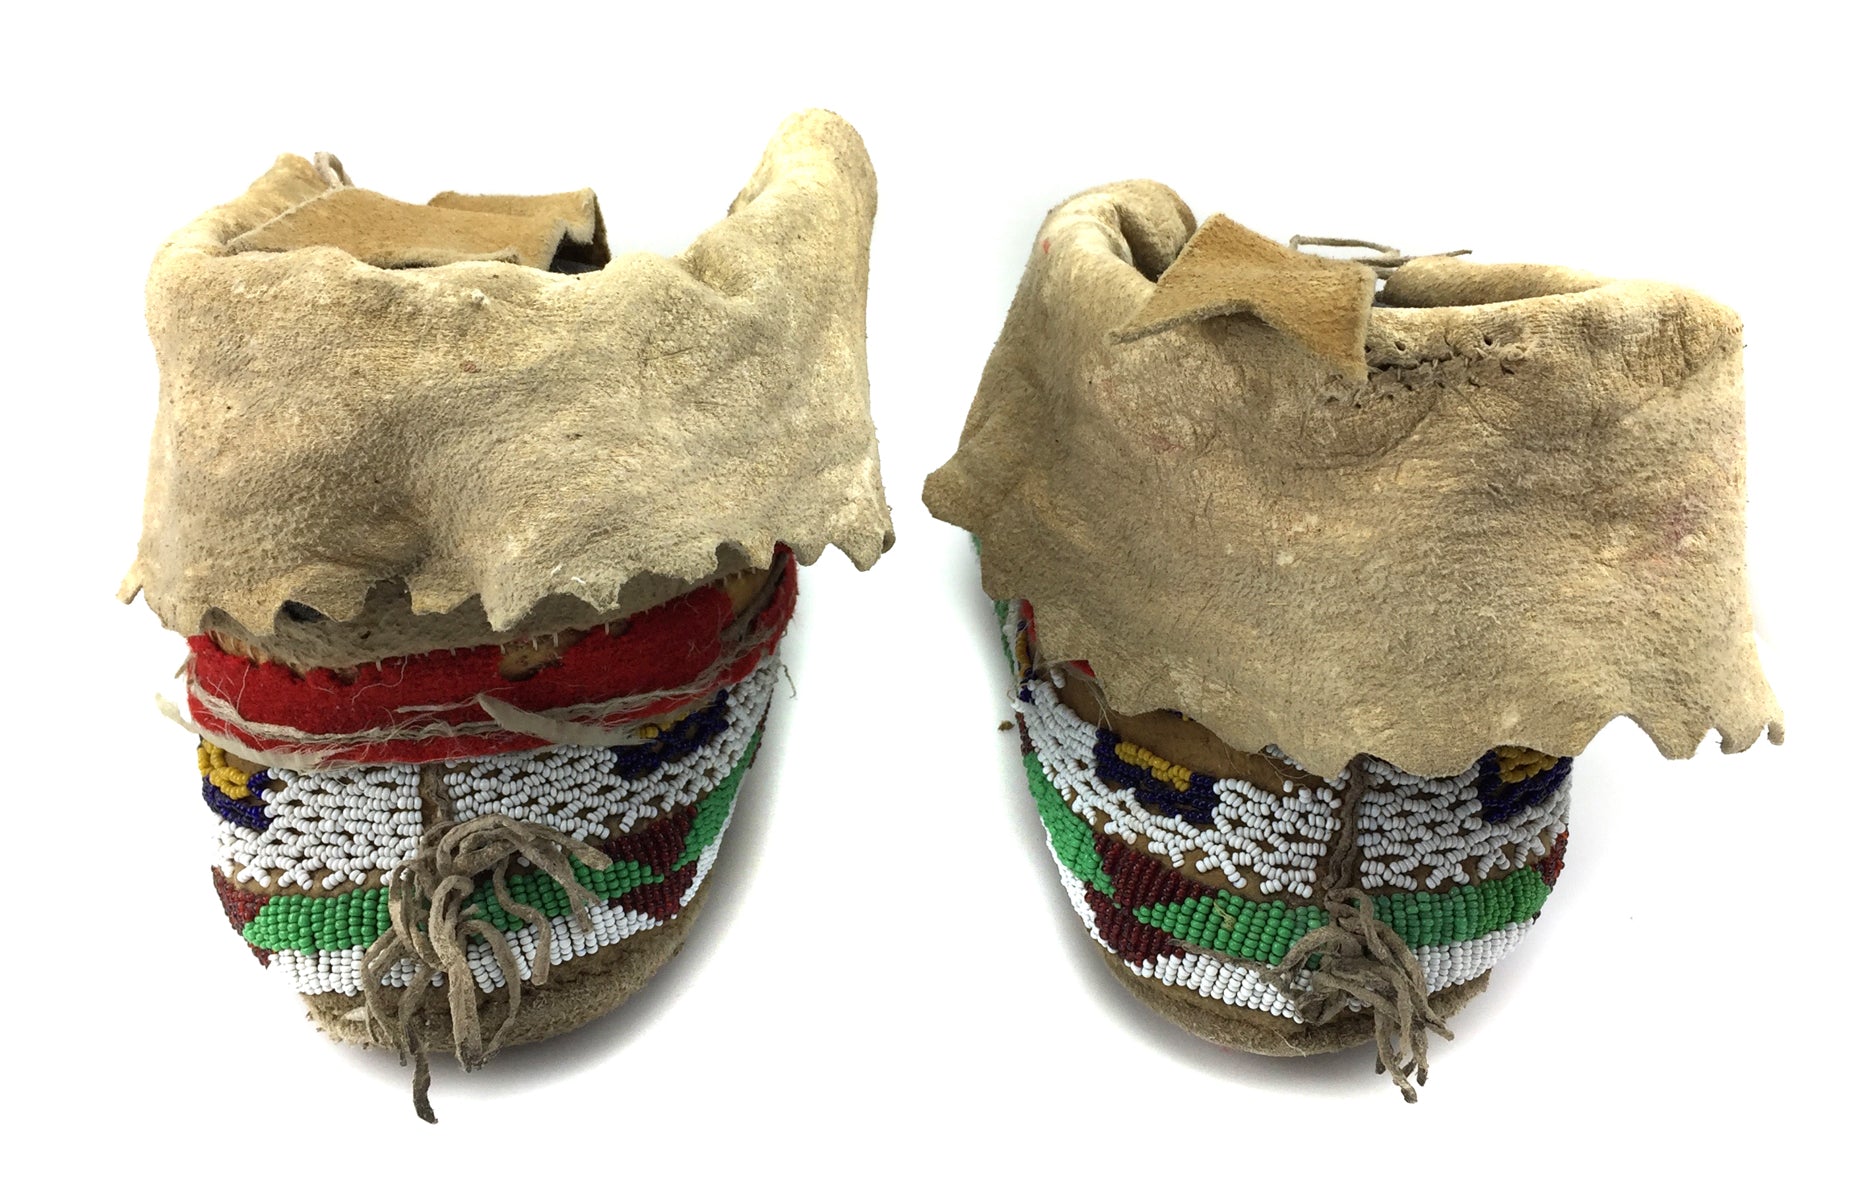 Possibly Gros Ventre Beaded Moccasins, c. 1900s, 8" x 9.5" x 3.5" each (DW90757-0421-012)3